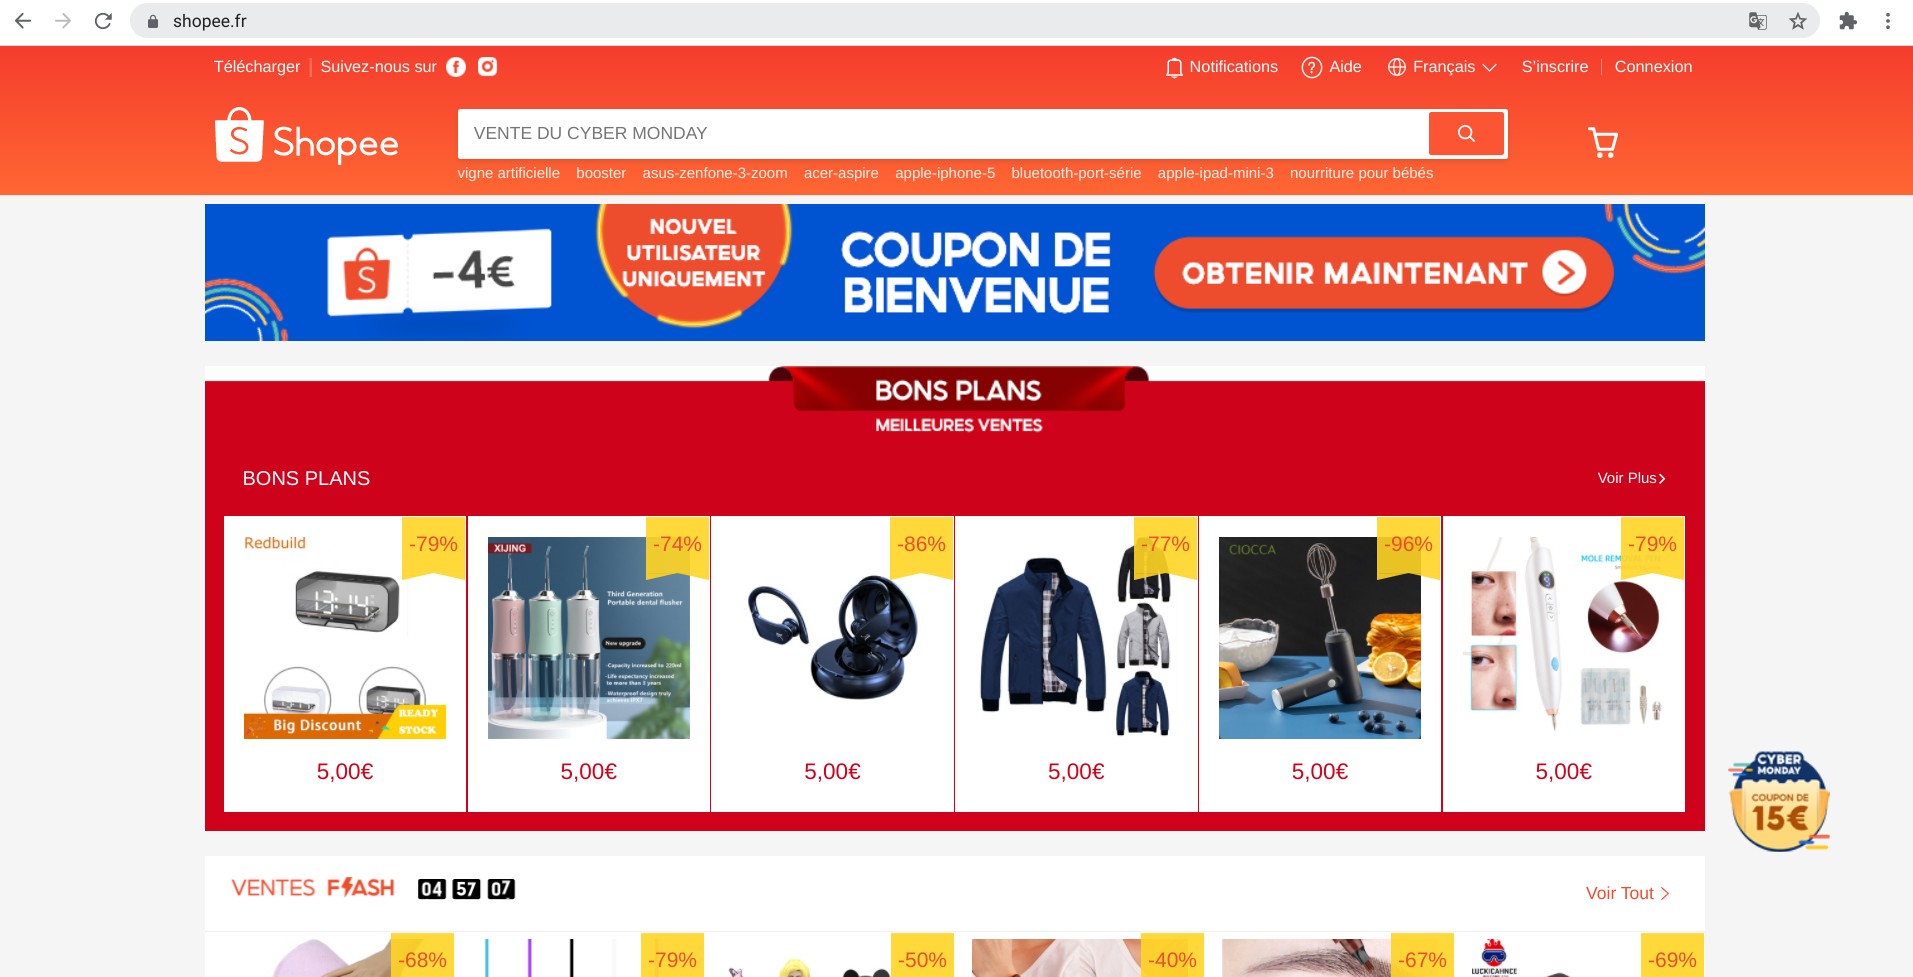 The homepage of shopee.fr